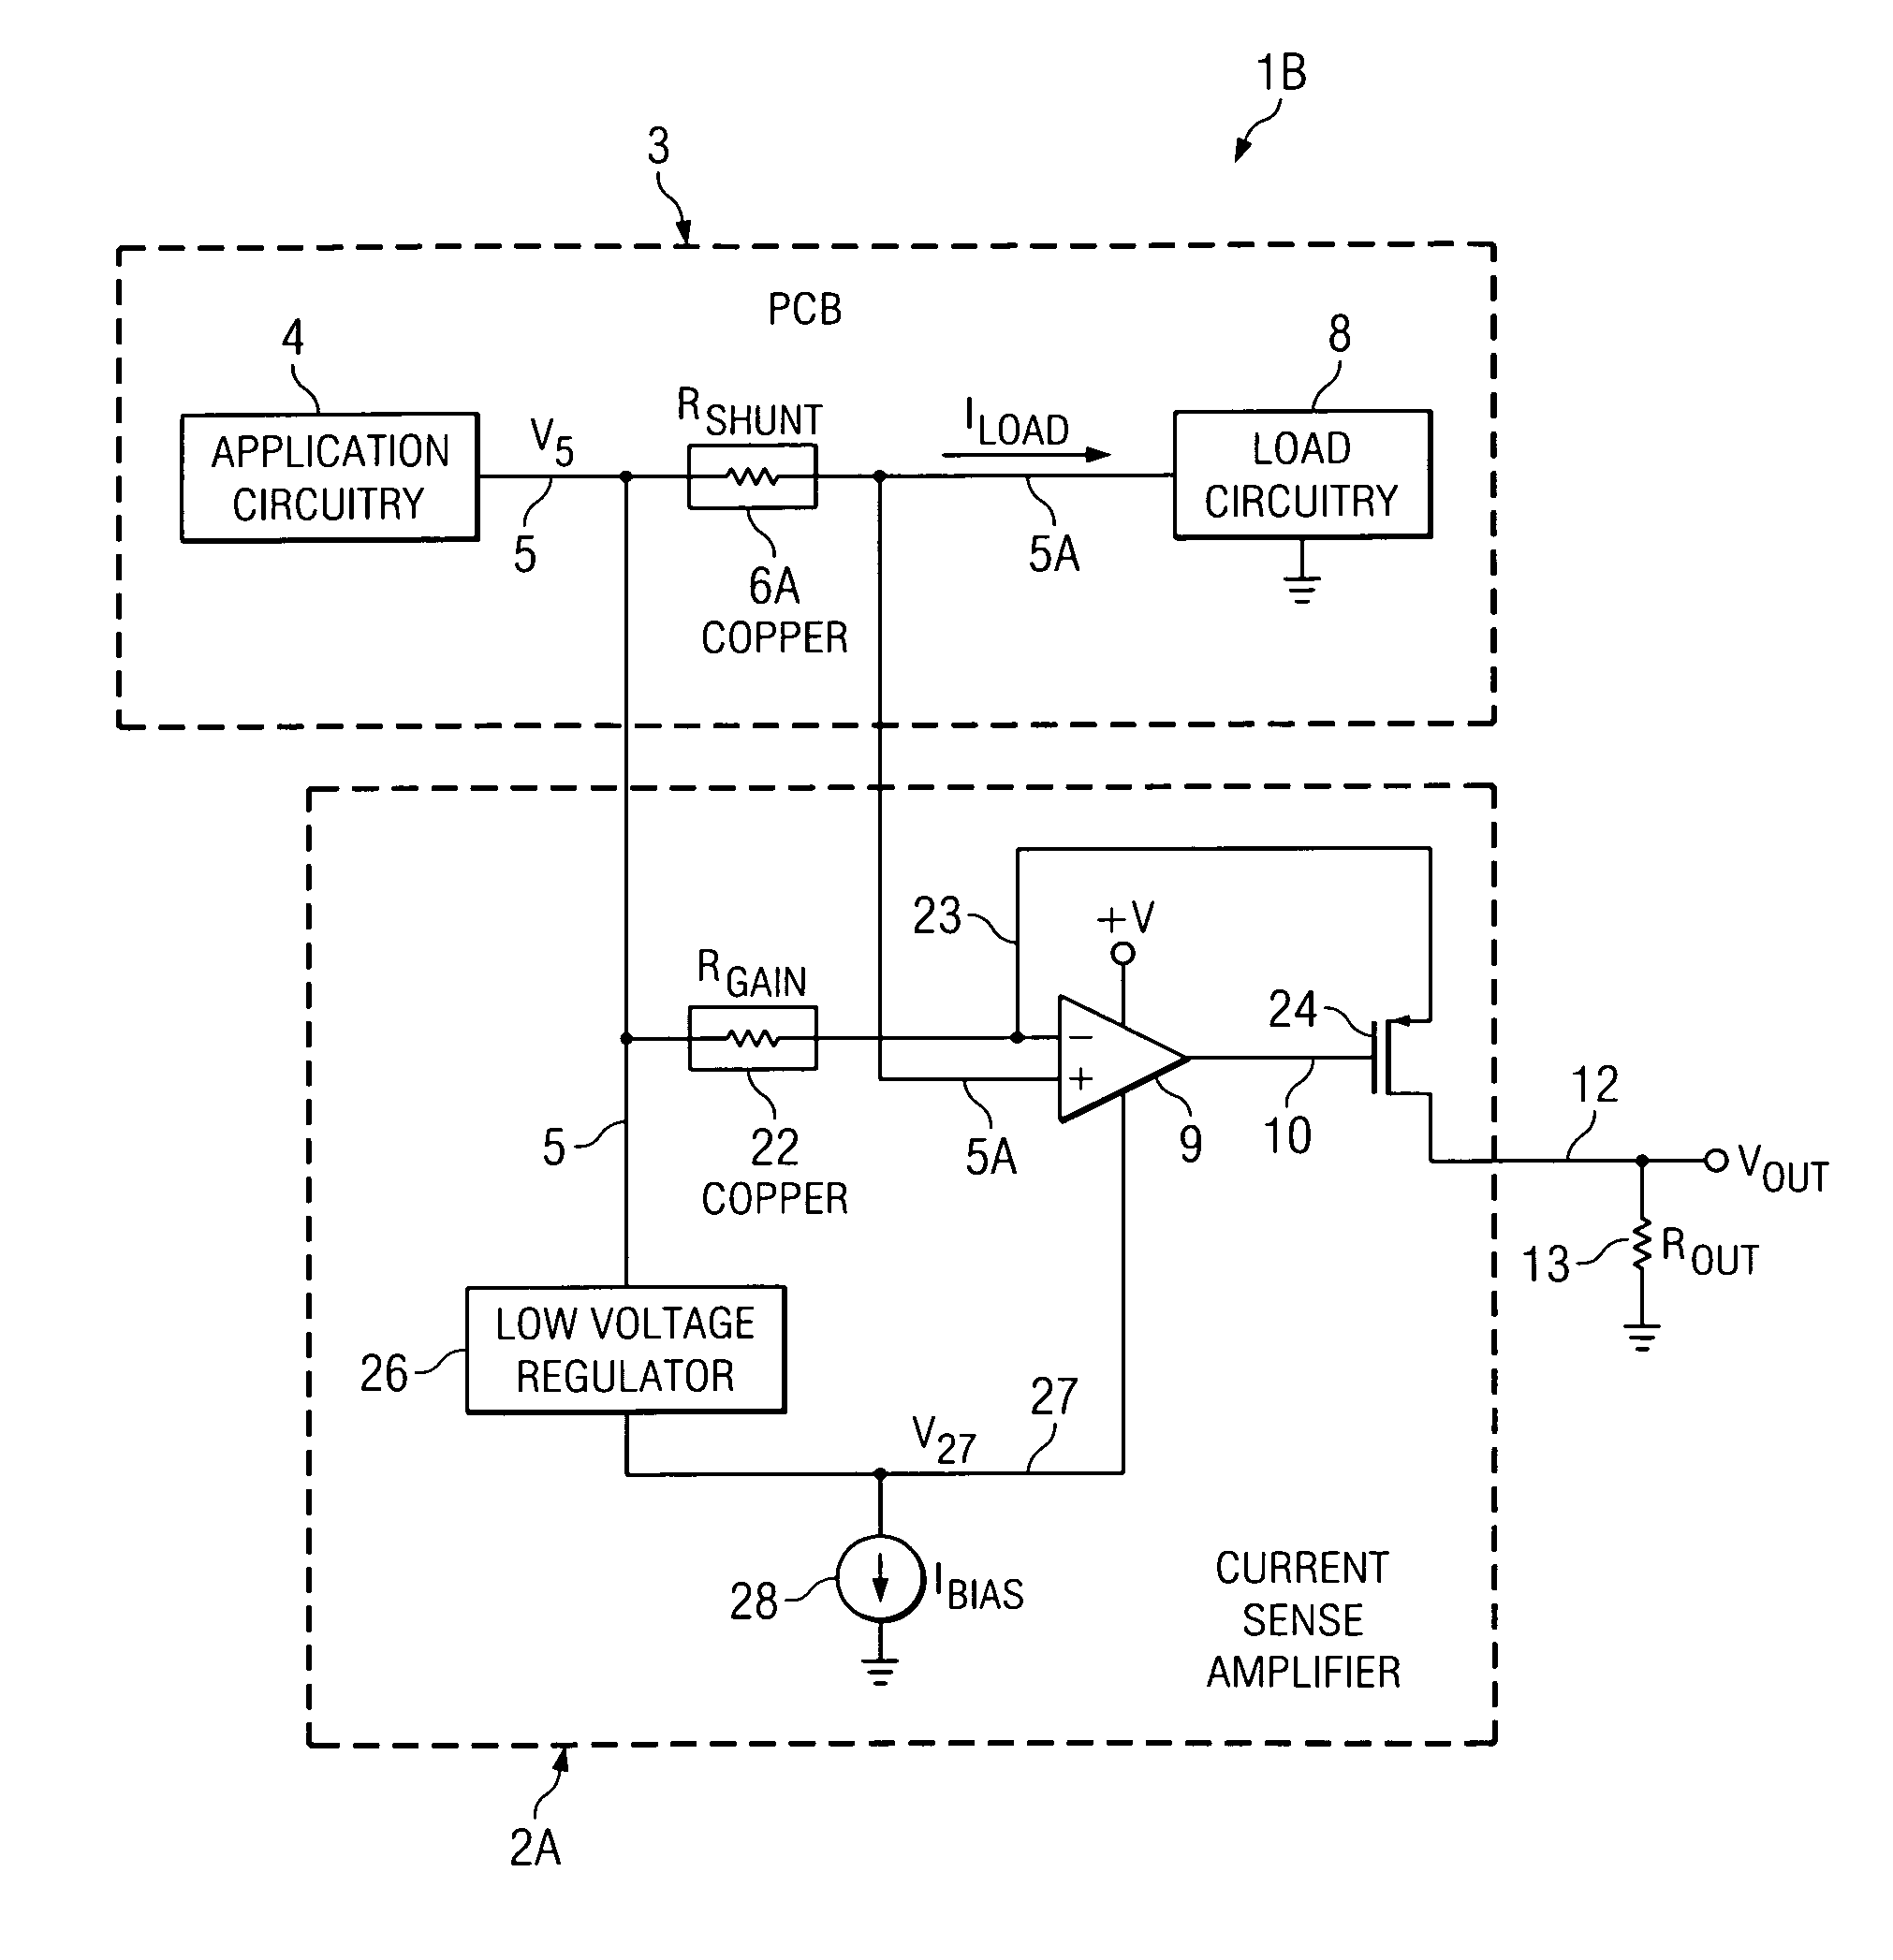 Amplifier topology and method for connecting to printed circuit board traces used as shunt resistors